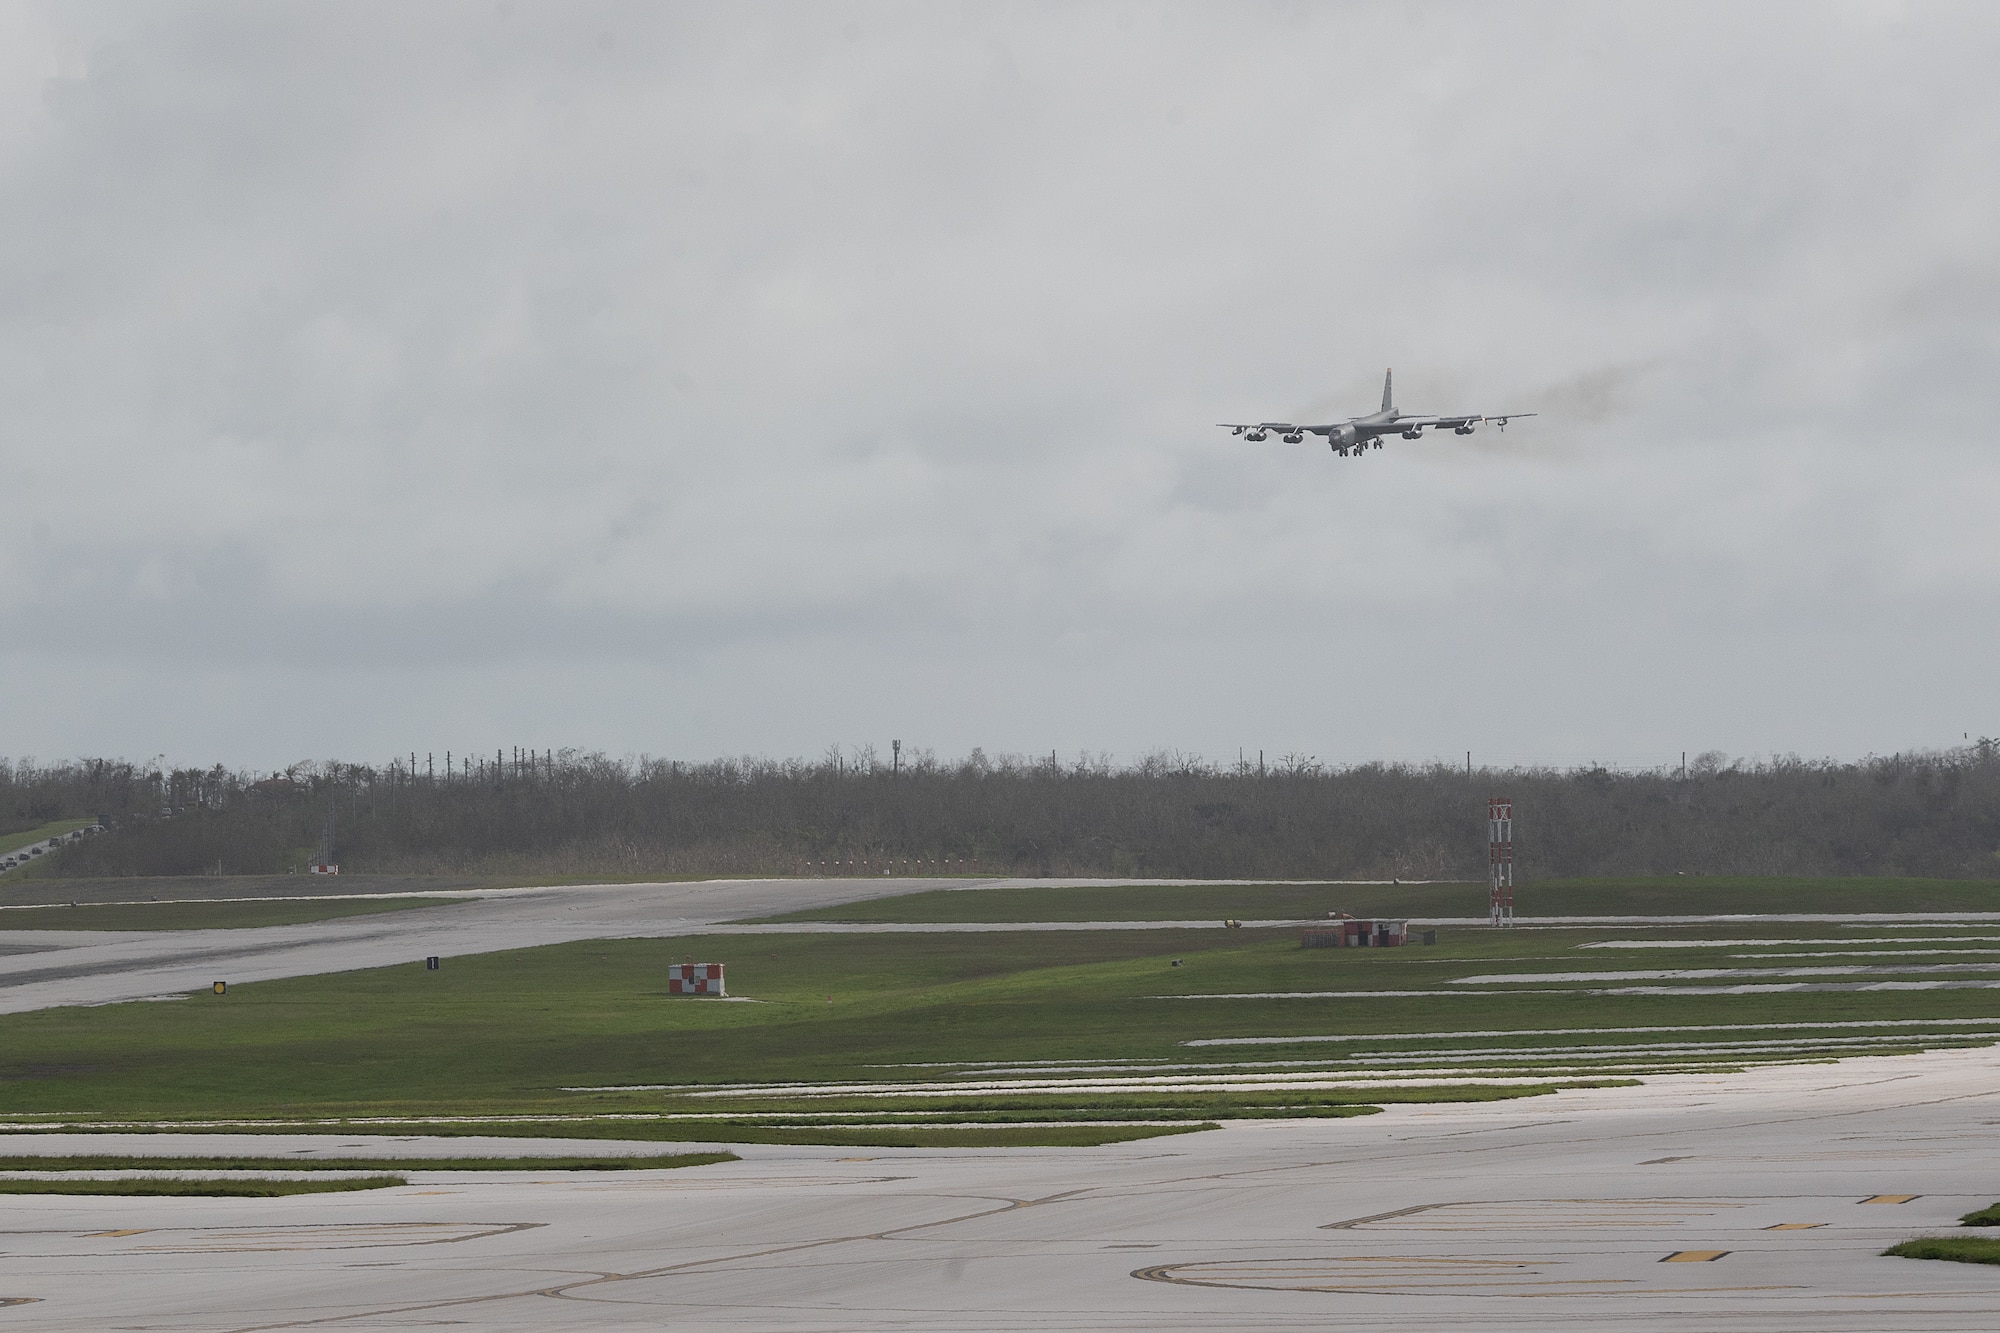 A U.S. Air Force B-52H Stratofortress assigned to the 23rd Bomb Squadron at Minot Air Force Base, North Dakota, prepares to land on the flightline at Andersen Air Force Base, Guam, for a Bomber Task Force deployment, June 12, 2023. U.S. Strategic Command BTF missions help maintain global stability and security by demonstrating the ability to operate in different environments and locations while building ally and partner military capabilities. (U.S. Air Force photo by Tech. Sgt. Zade Vadnais)